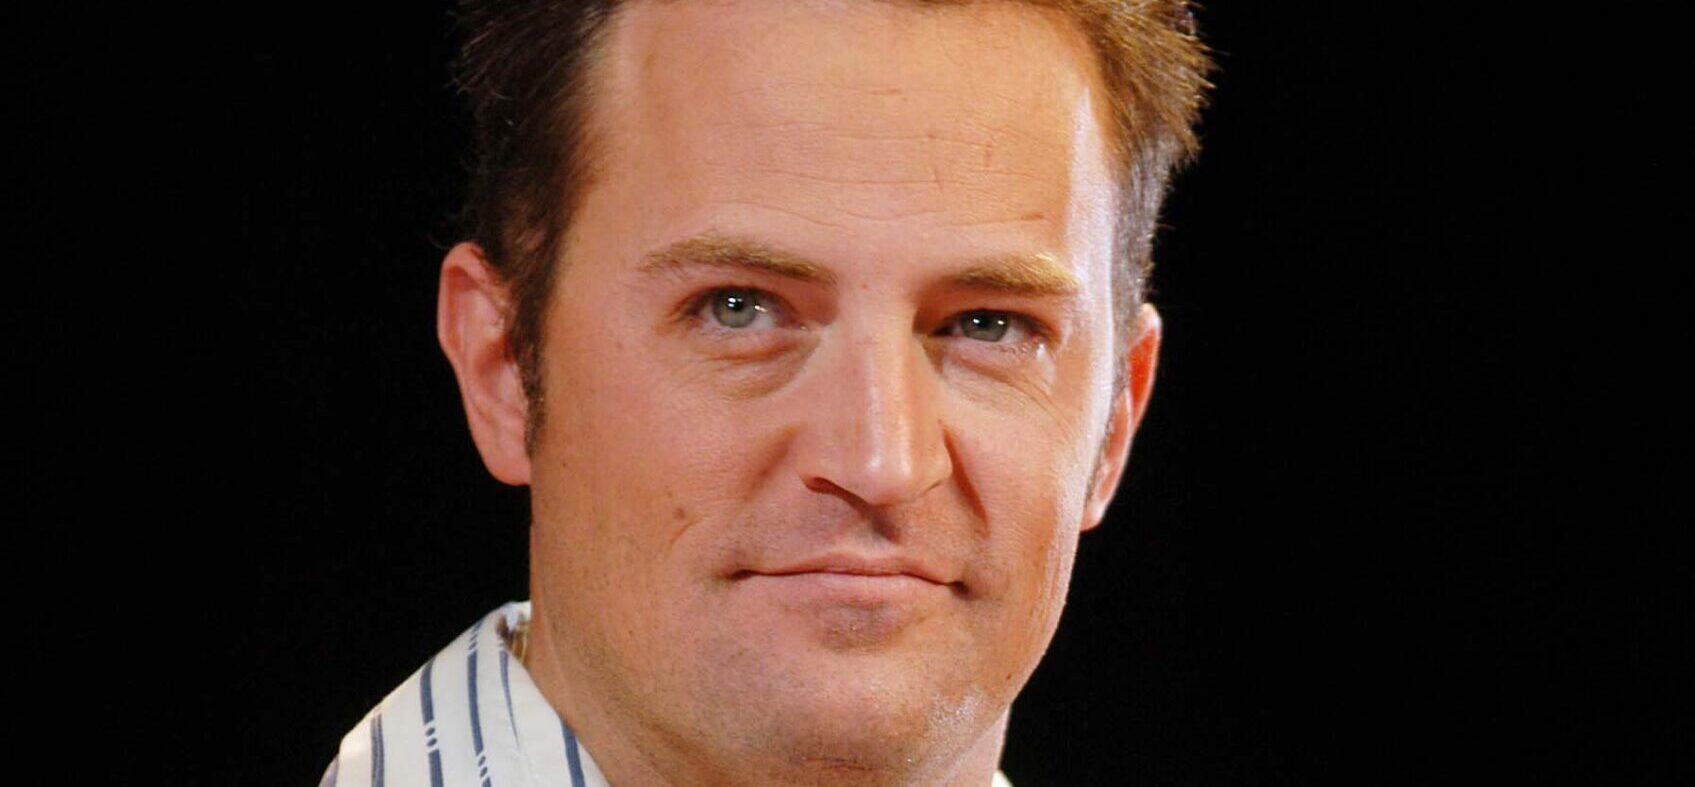 Matthew Perry at Photocall for new play "Sexual Perversity In Chicago" at the Comedy Theatre